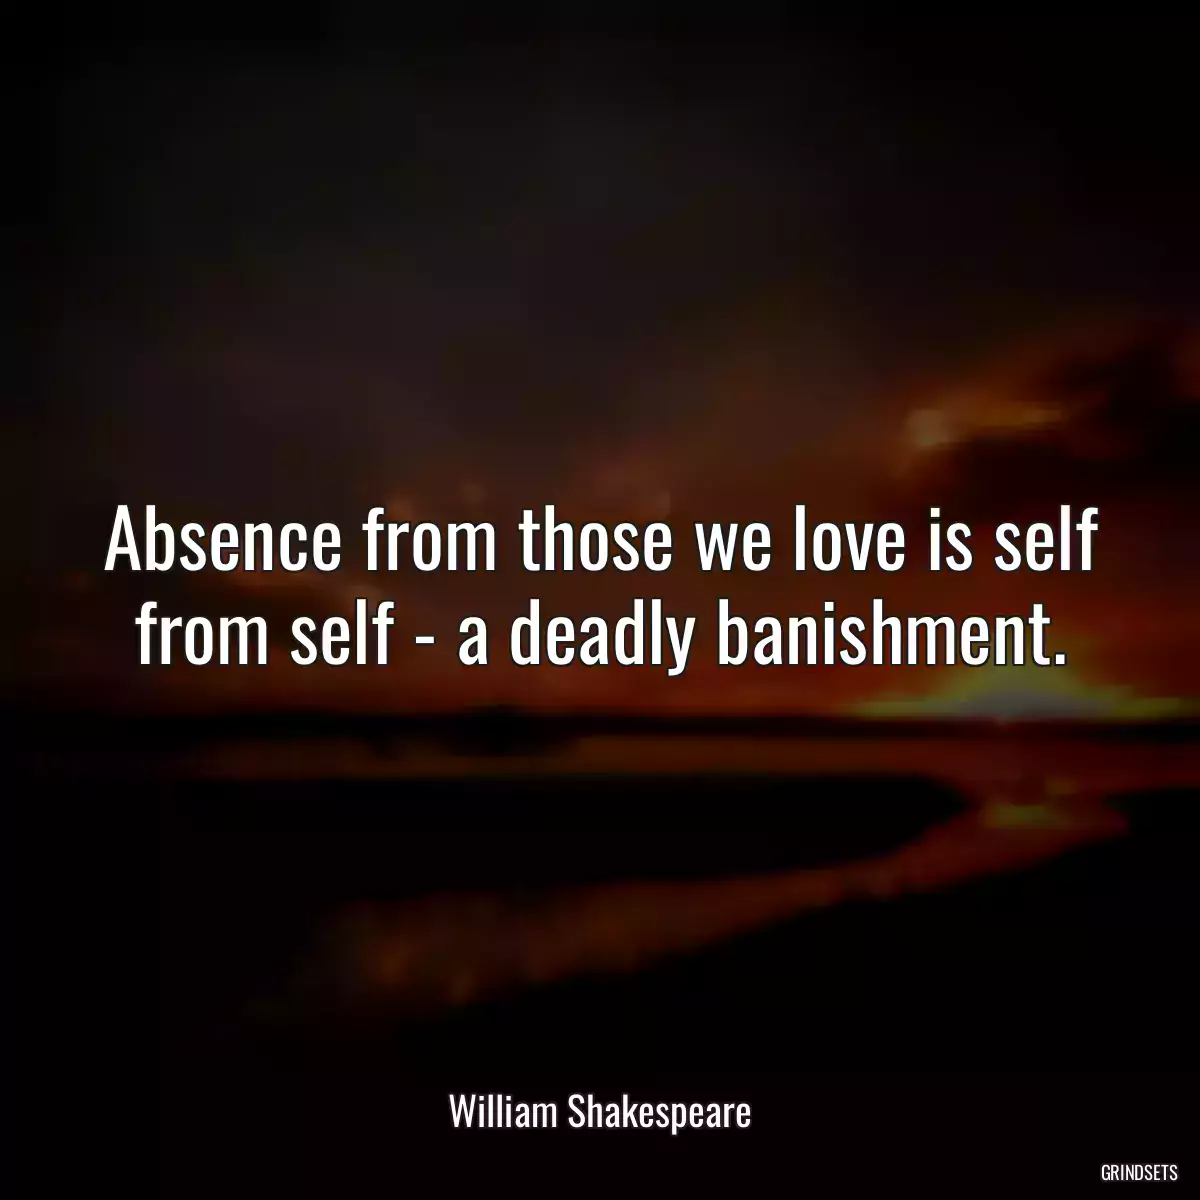 Absence from those we love is self from self - a deadly banishment.